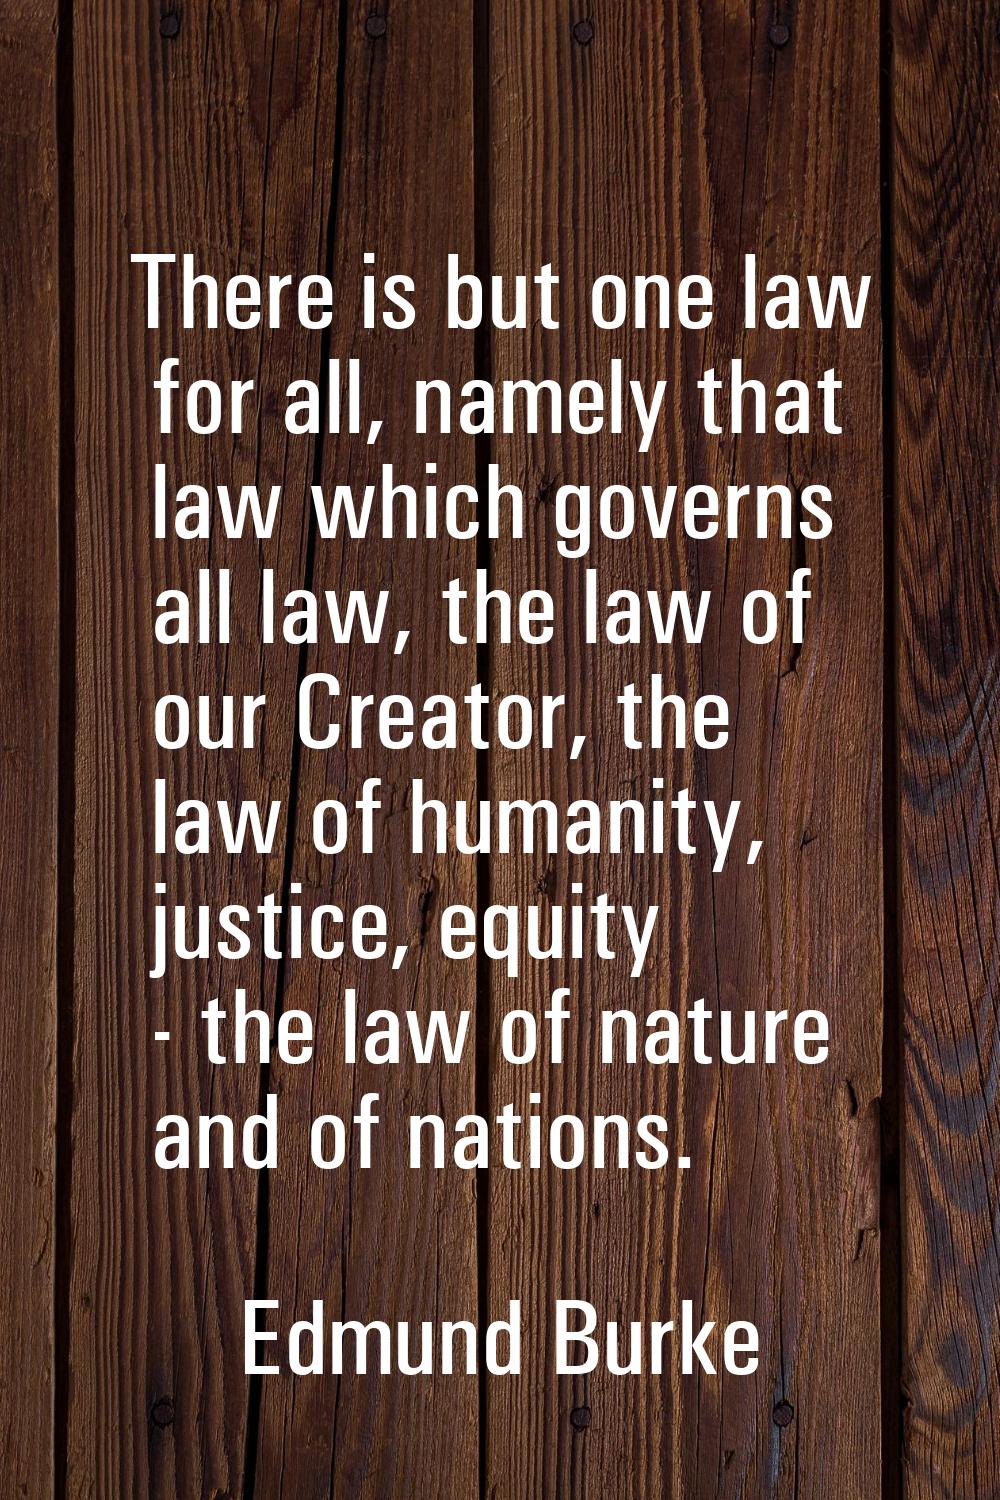 There is but one law for all, namely that law which governs all law, the law of our Creator, the la